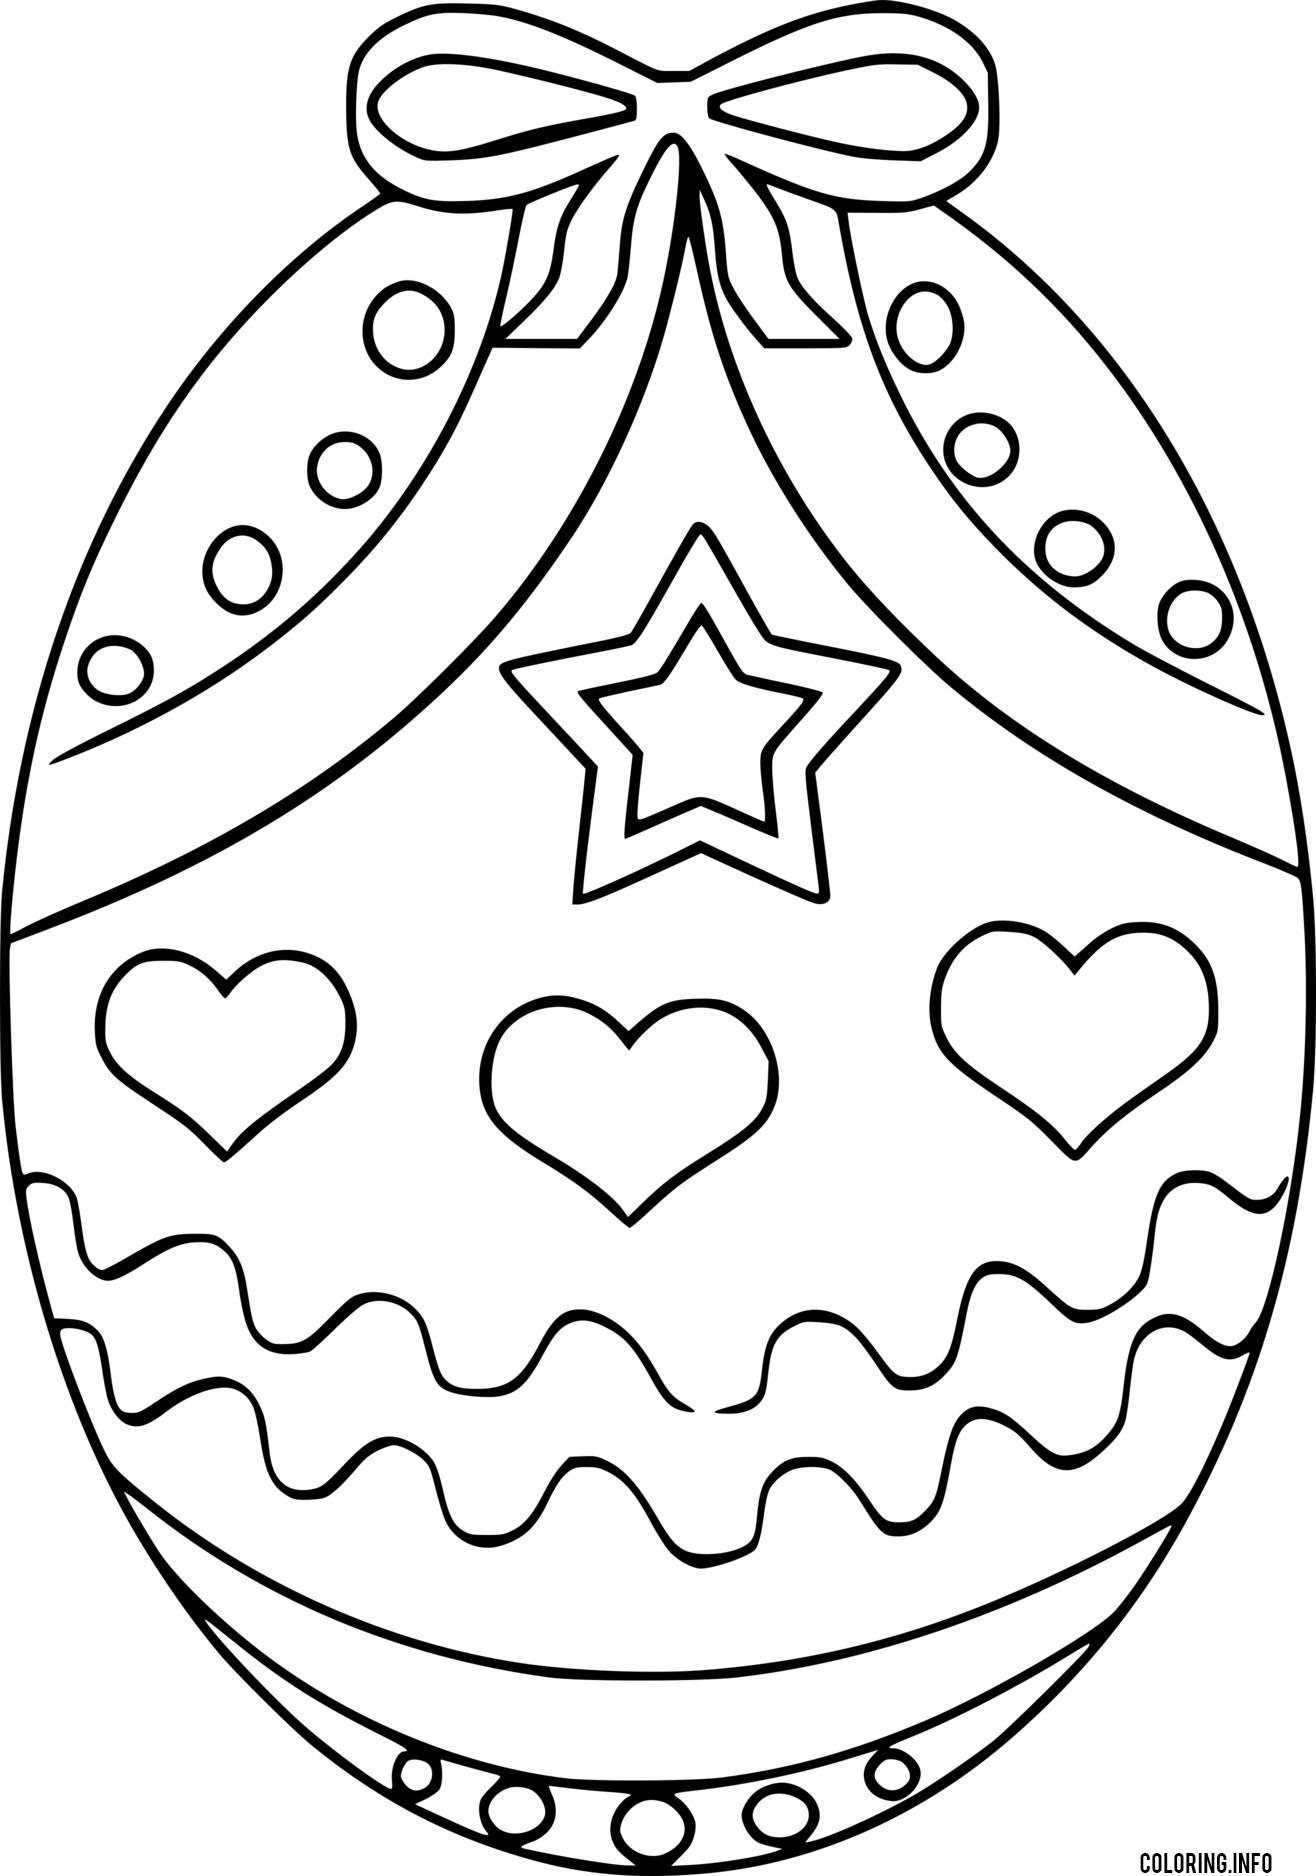 Easter Egg With Star And Hearts coloring